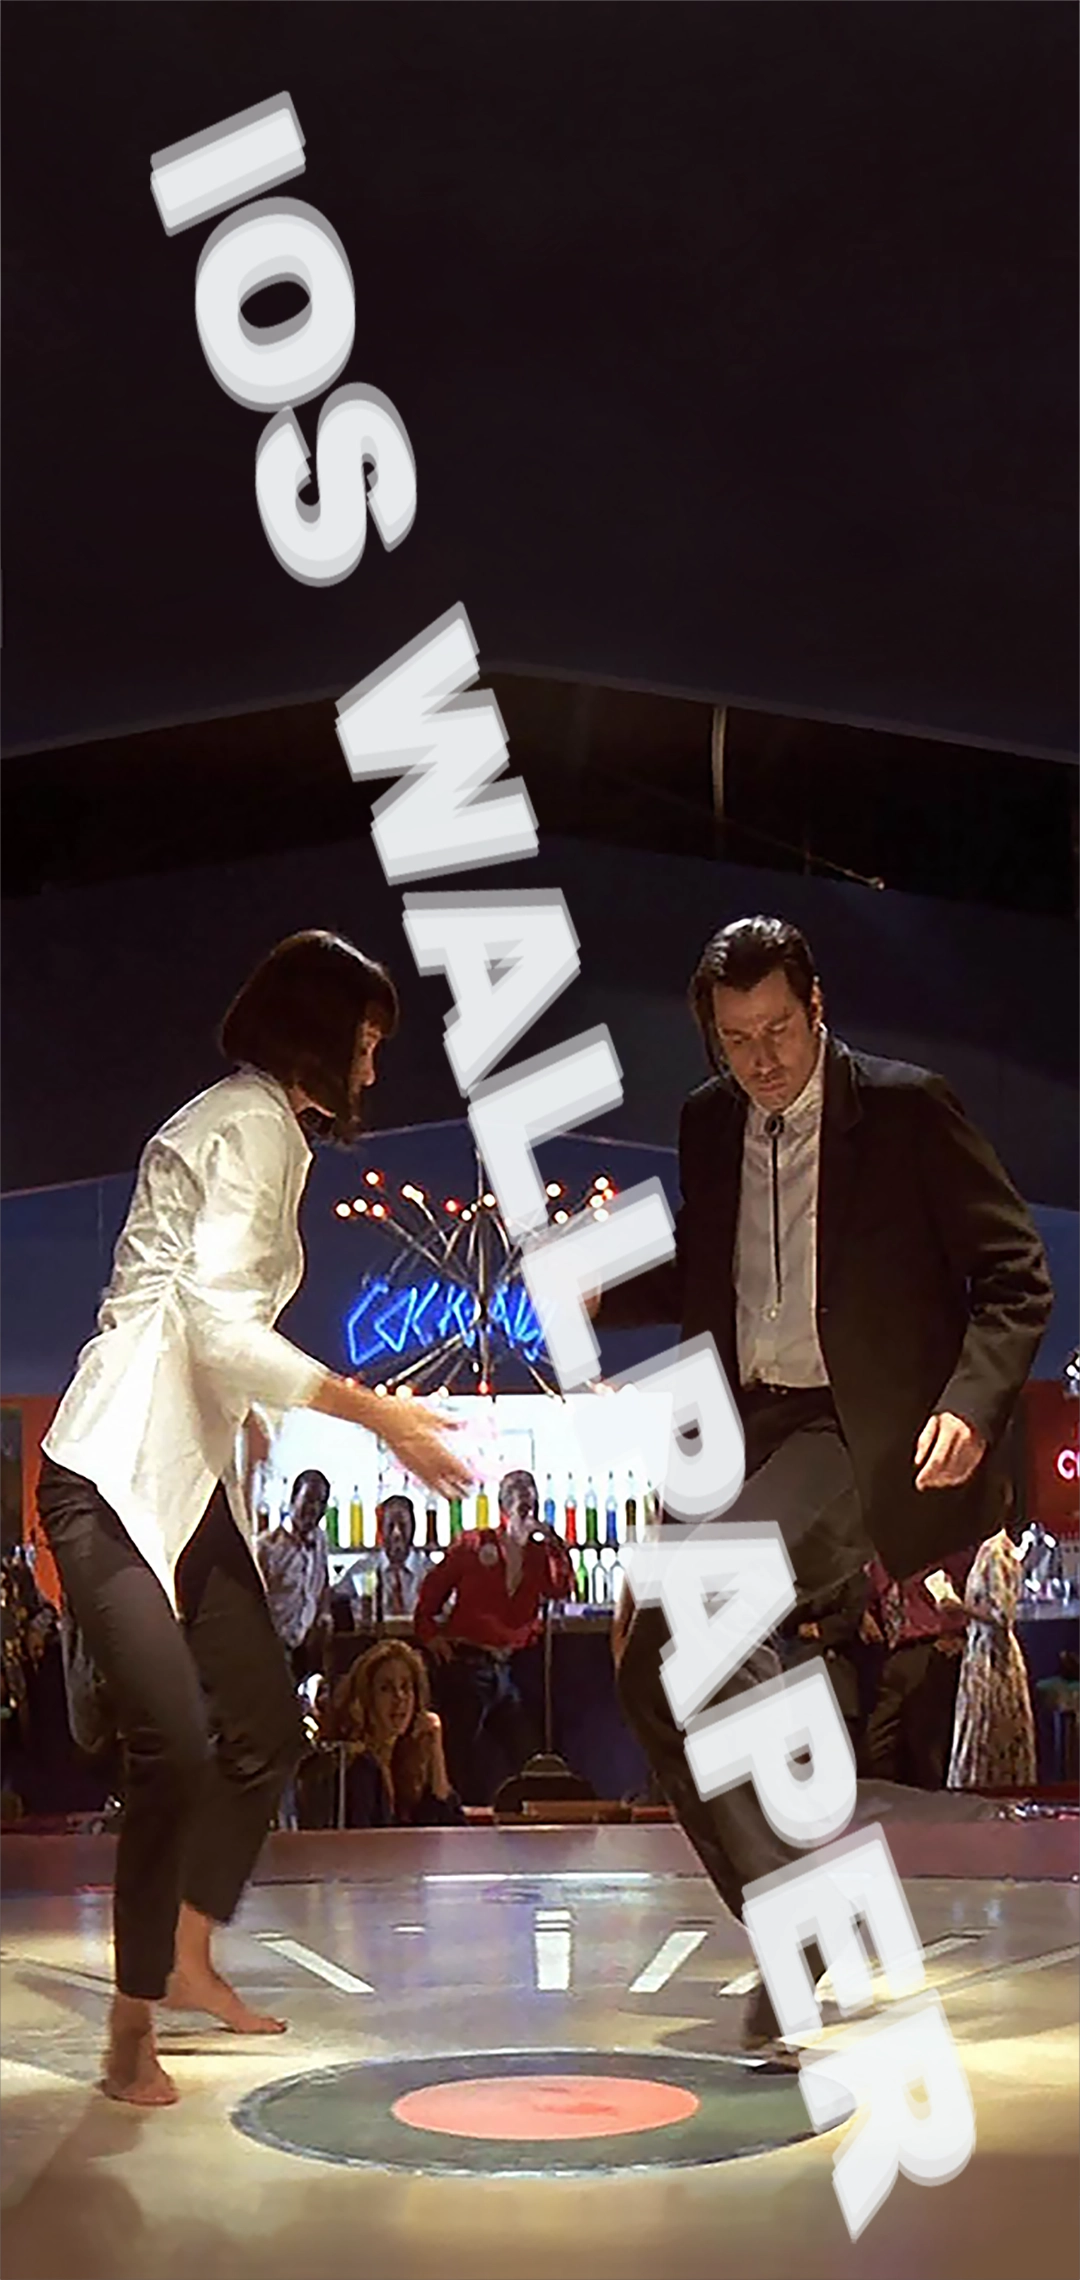 Pulp Fiction - I Want to Dance | Digital Download